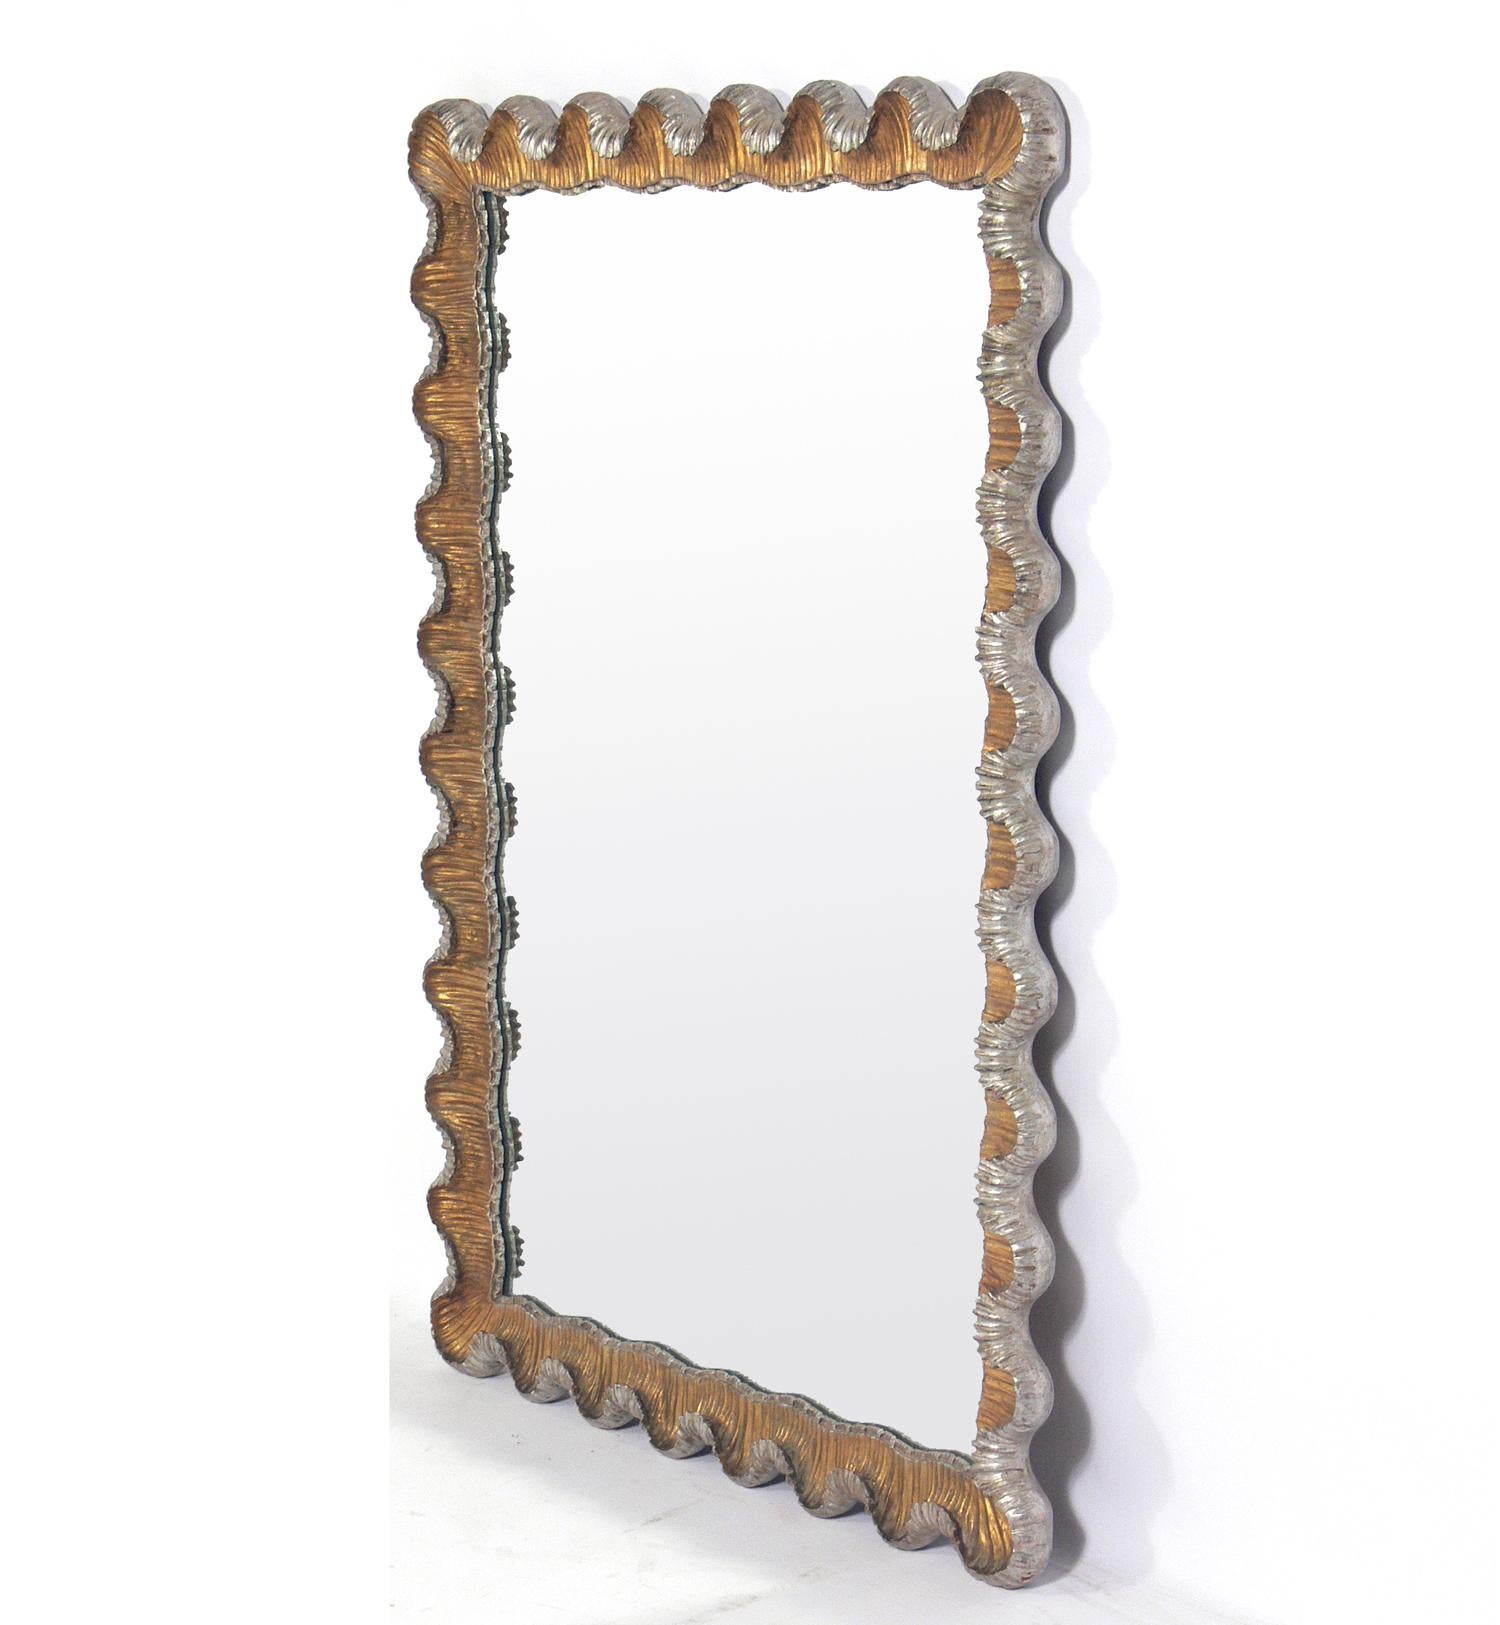 Venetian scalloped mirror, Italy, circa 1950s. Gold leaf on the front side and silver leafed on the outer sides and back of the frame. Undulating curves of hand carved and giltwood and gesso give this mirror it's elegant form. The original gilt